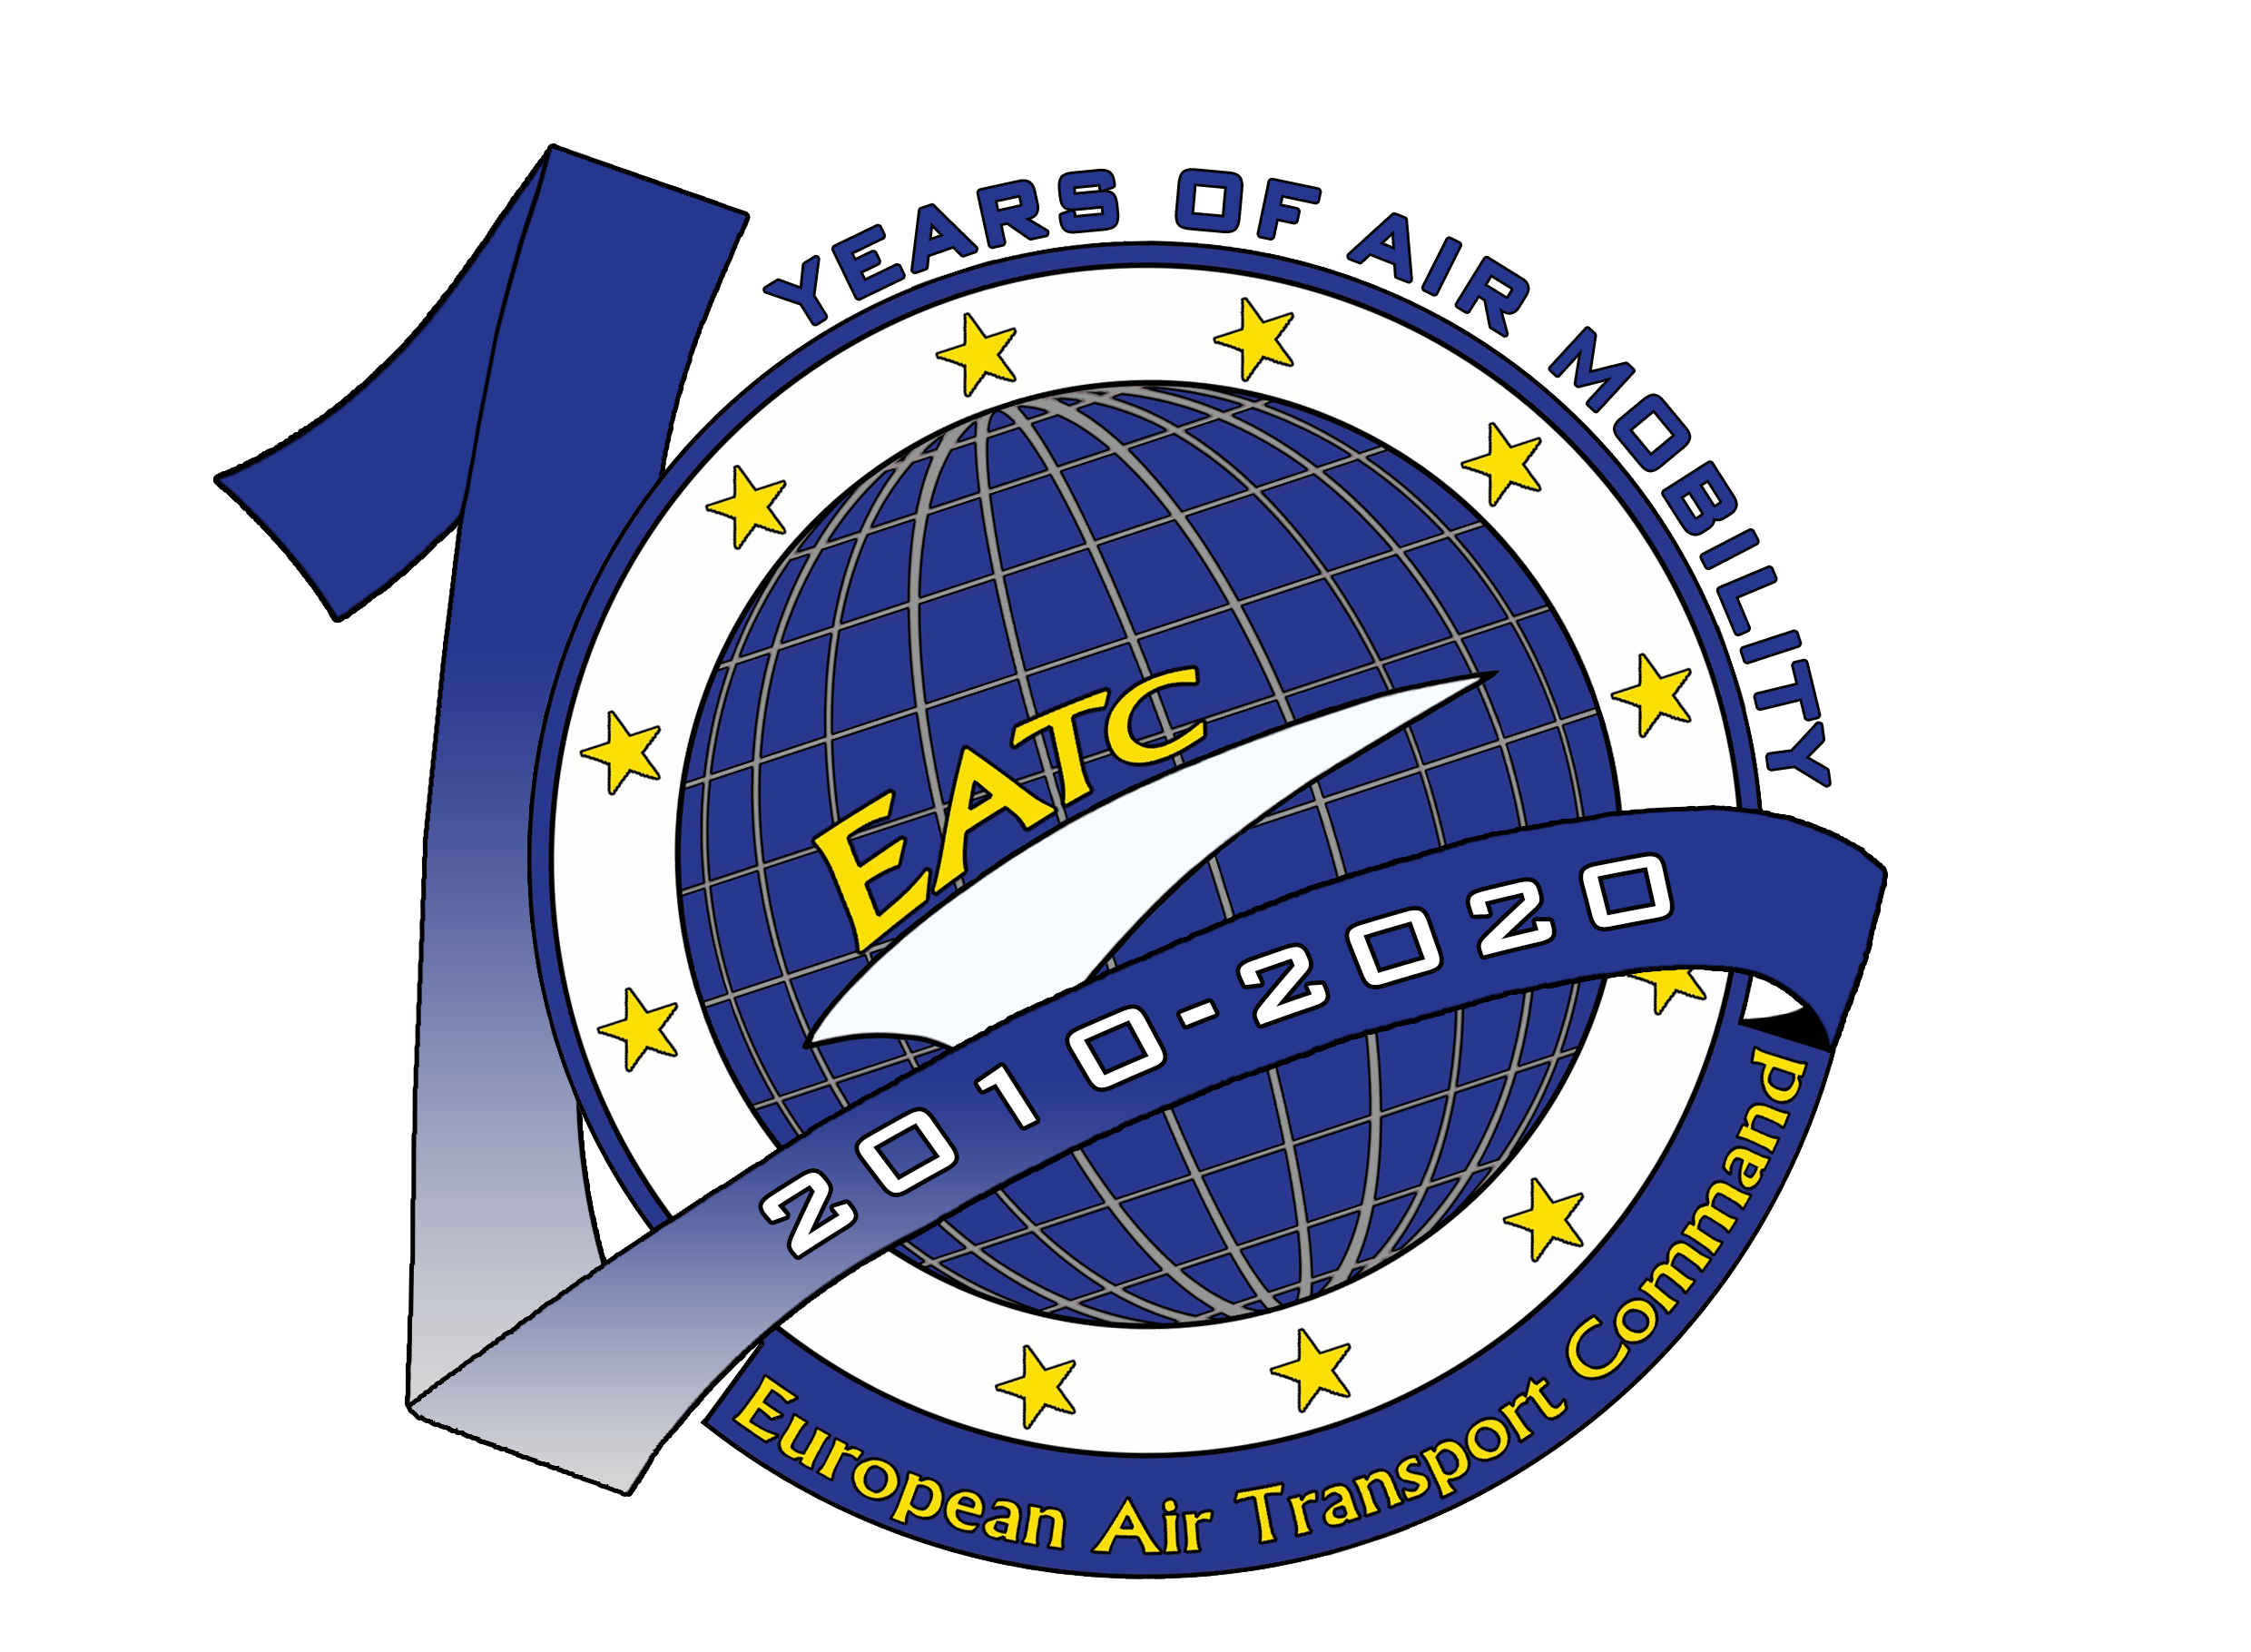 Watch the EATC 10th Anniversary video